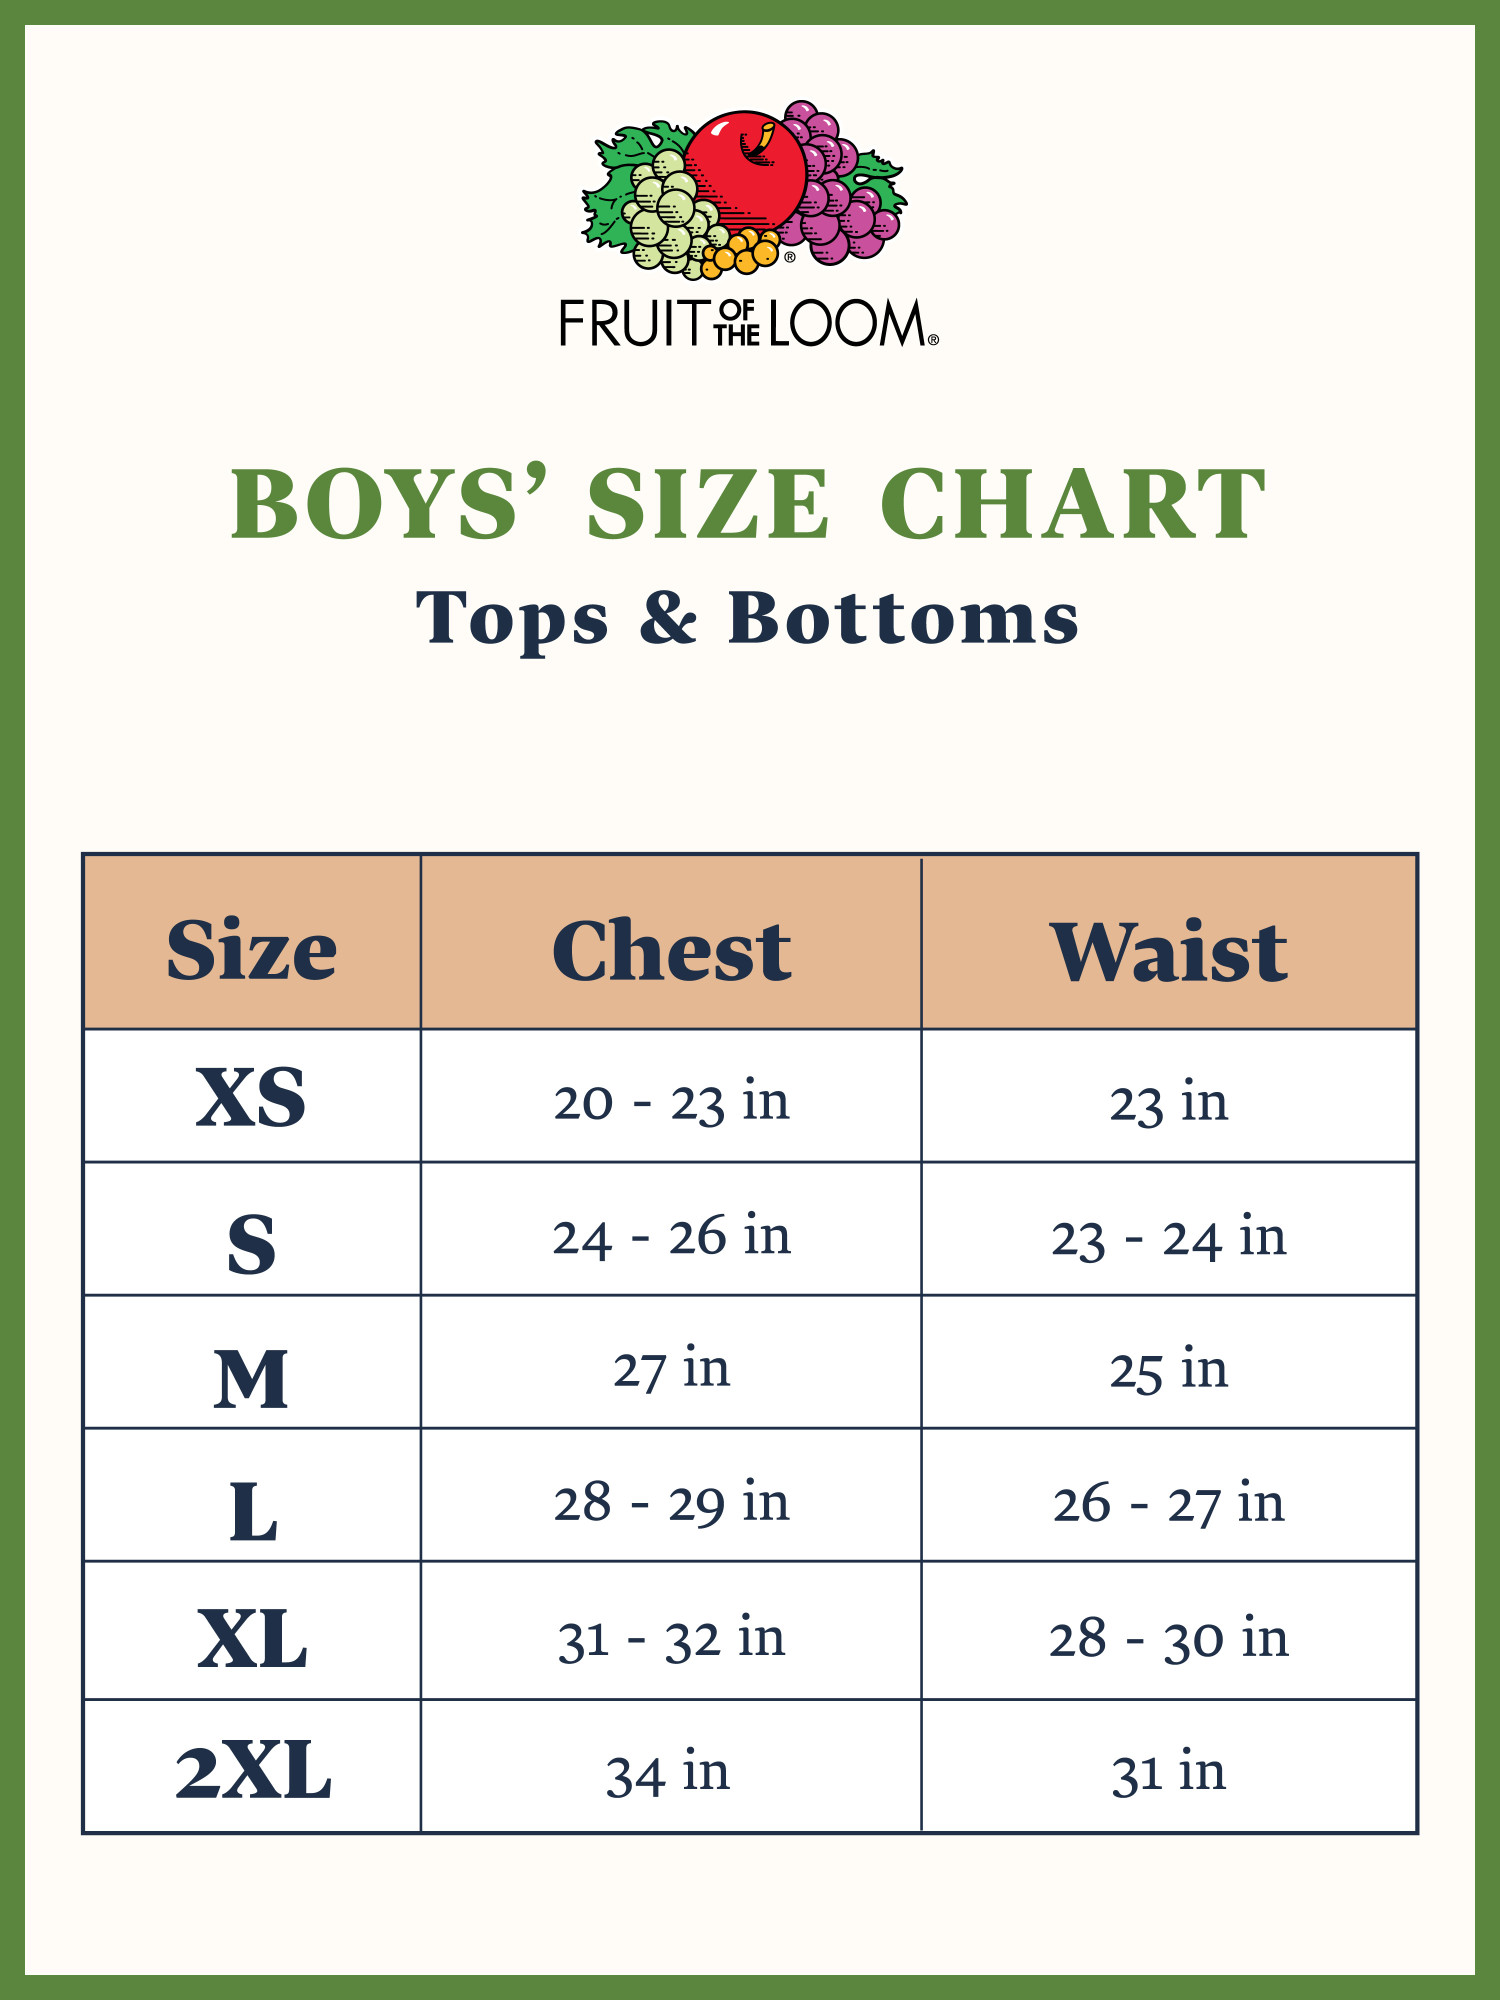 Fruit of the Loom Boys Short Sleeve Crew T-Shirts, 3 Pack - image 4 of 5